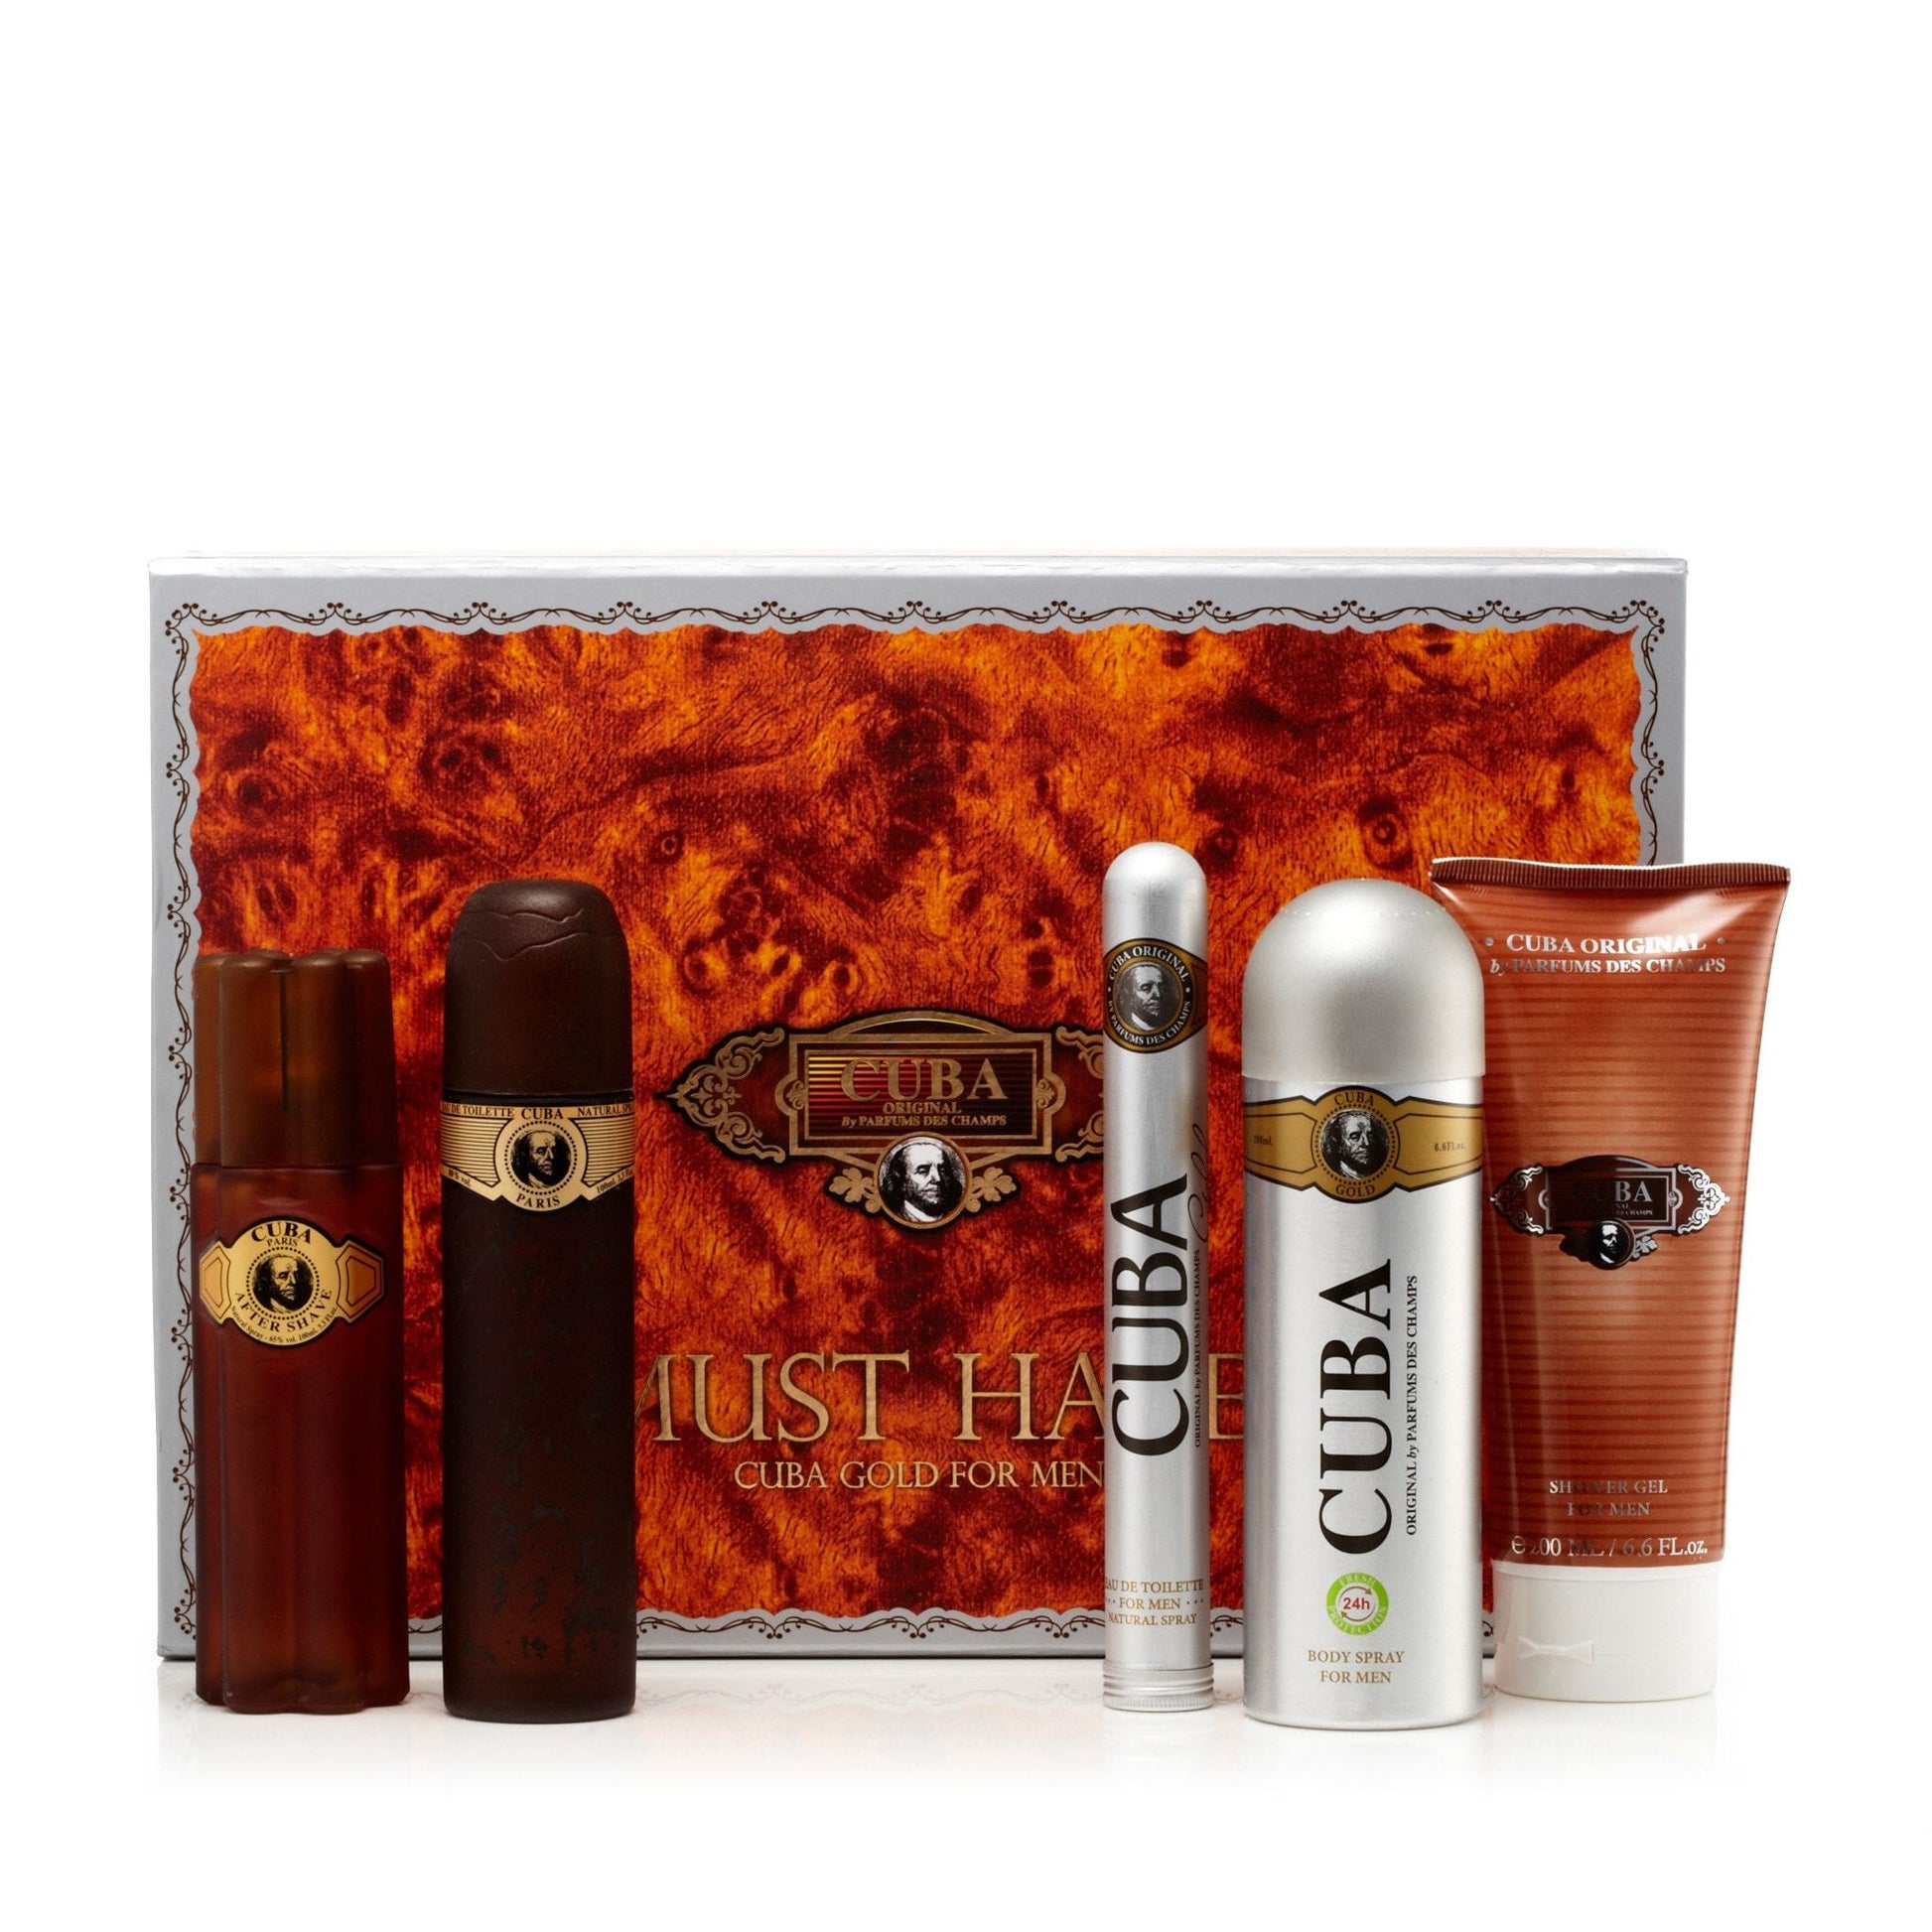 Must Have Gold Gift Set for Men by Cuba, Product image 1